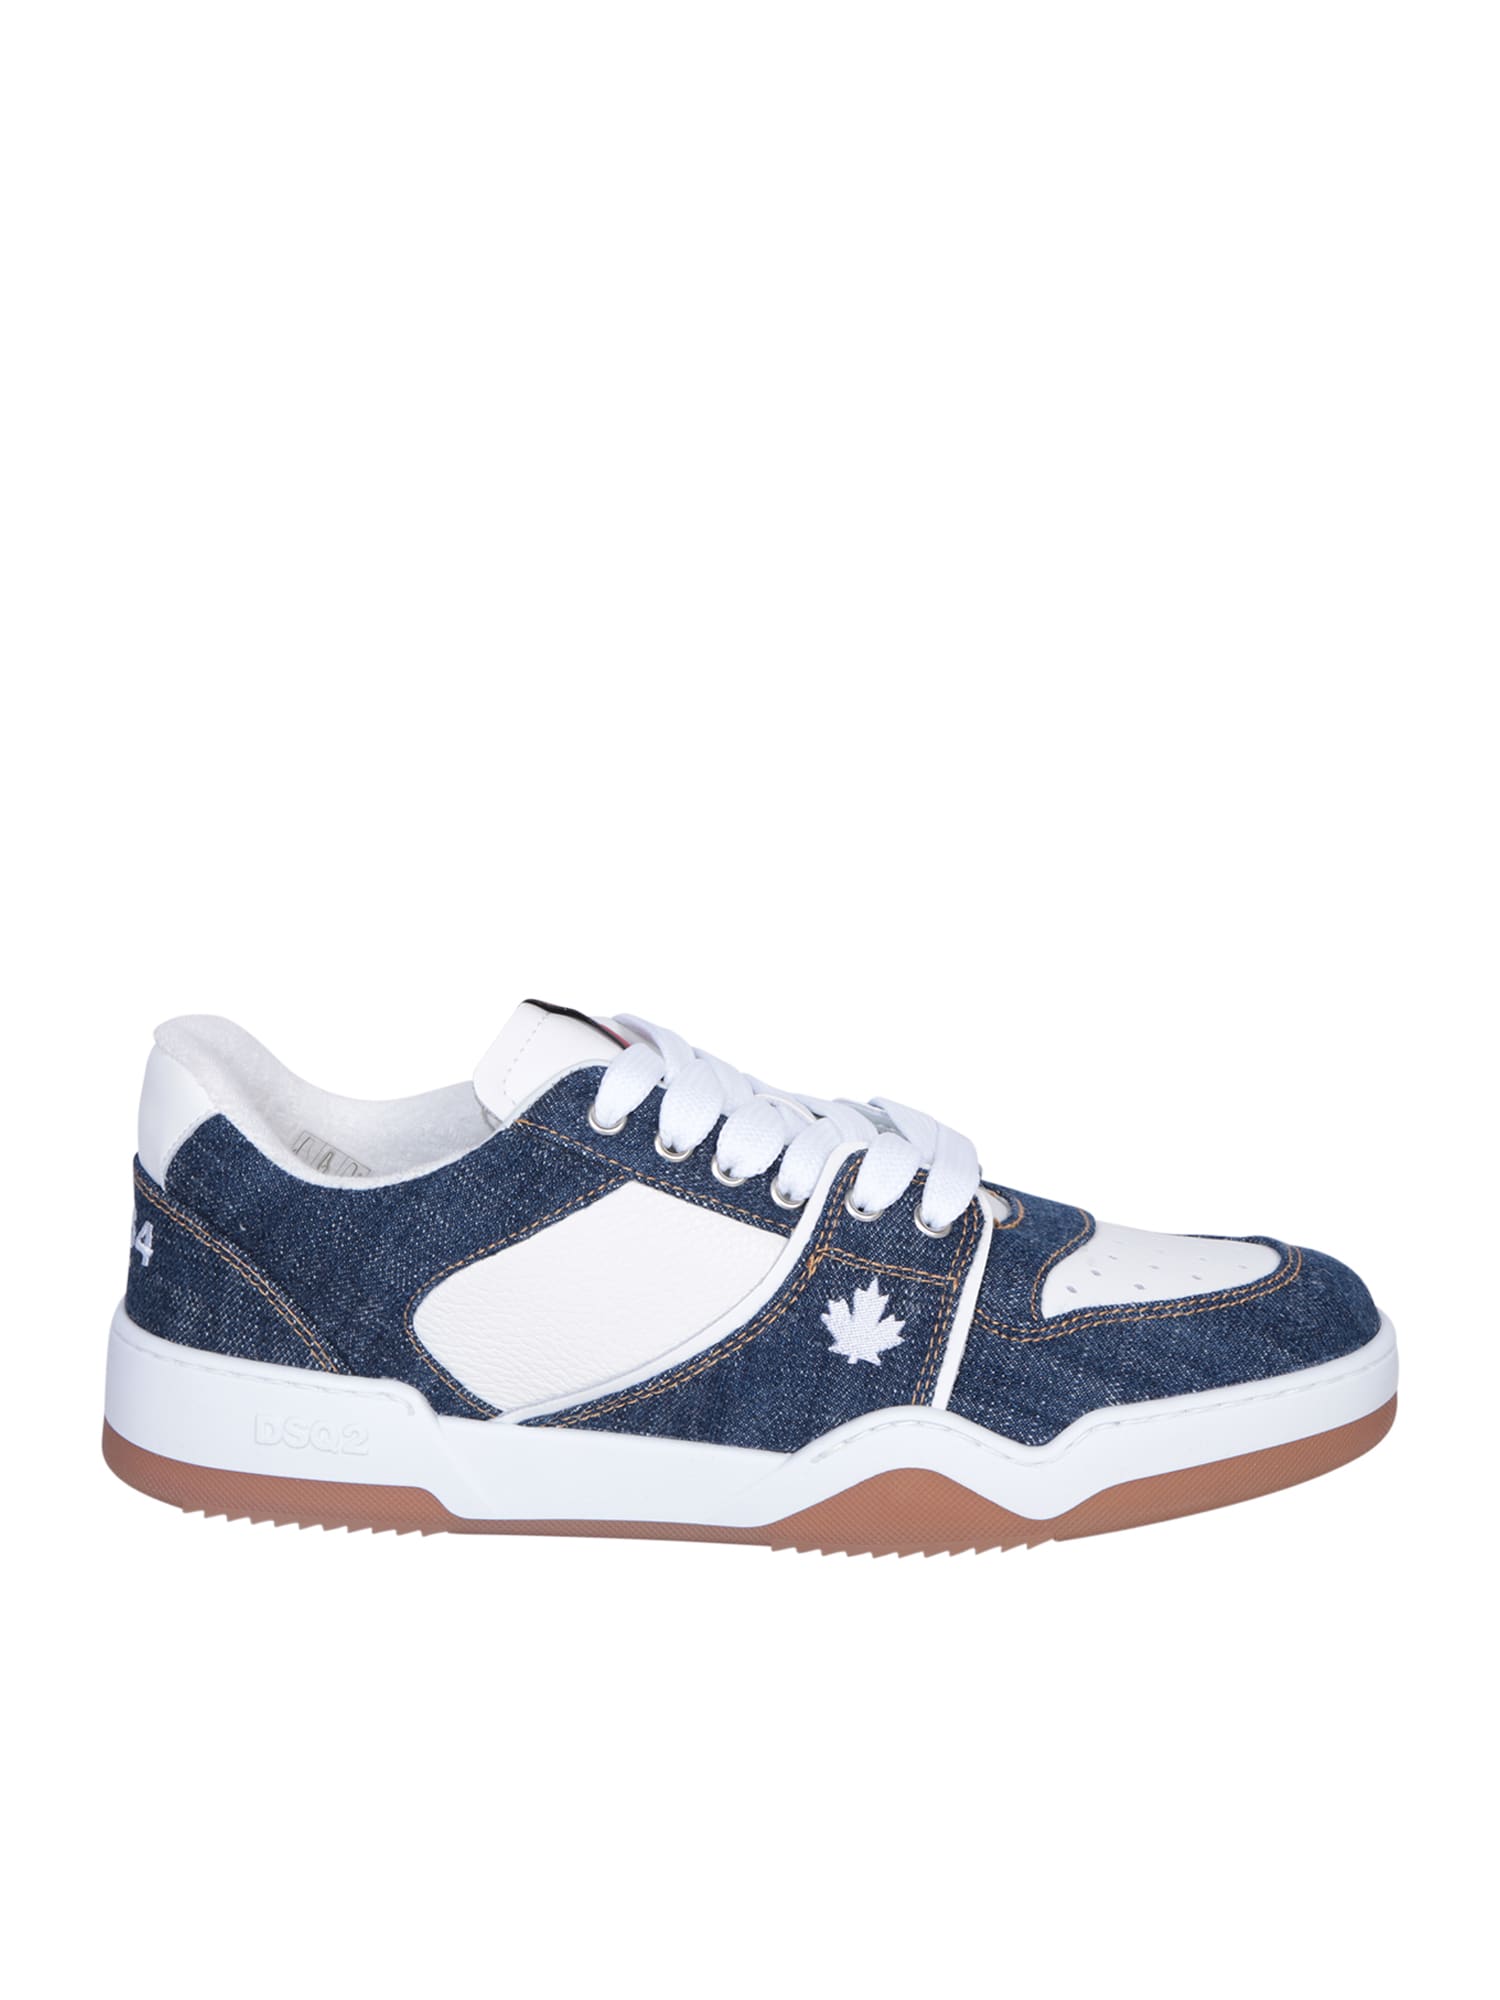 DSQUARED2 SPIKER WHITE/BLUE SNEAKERS